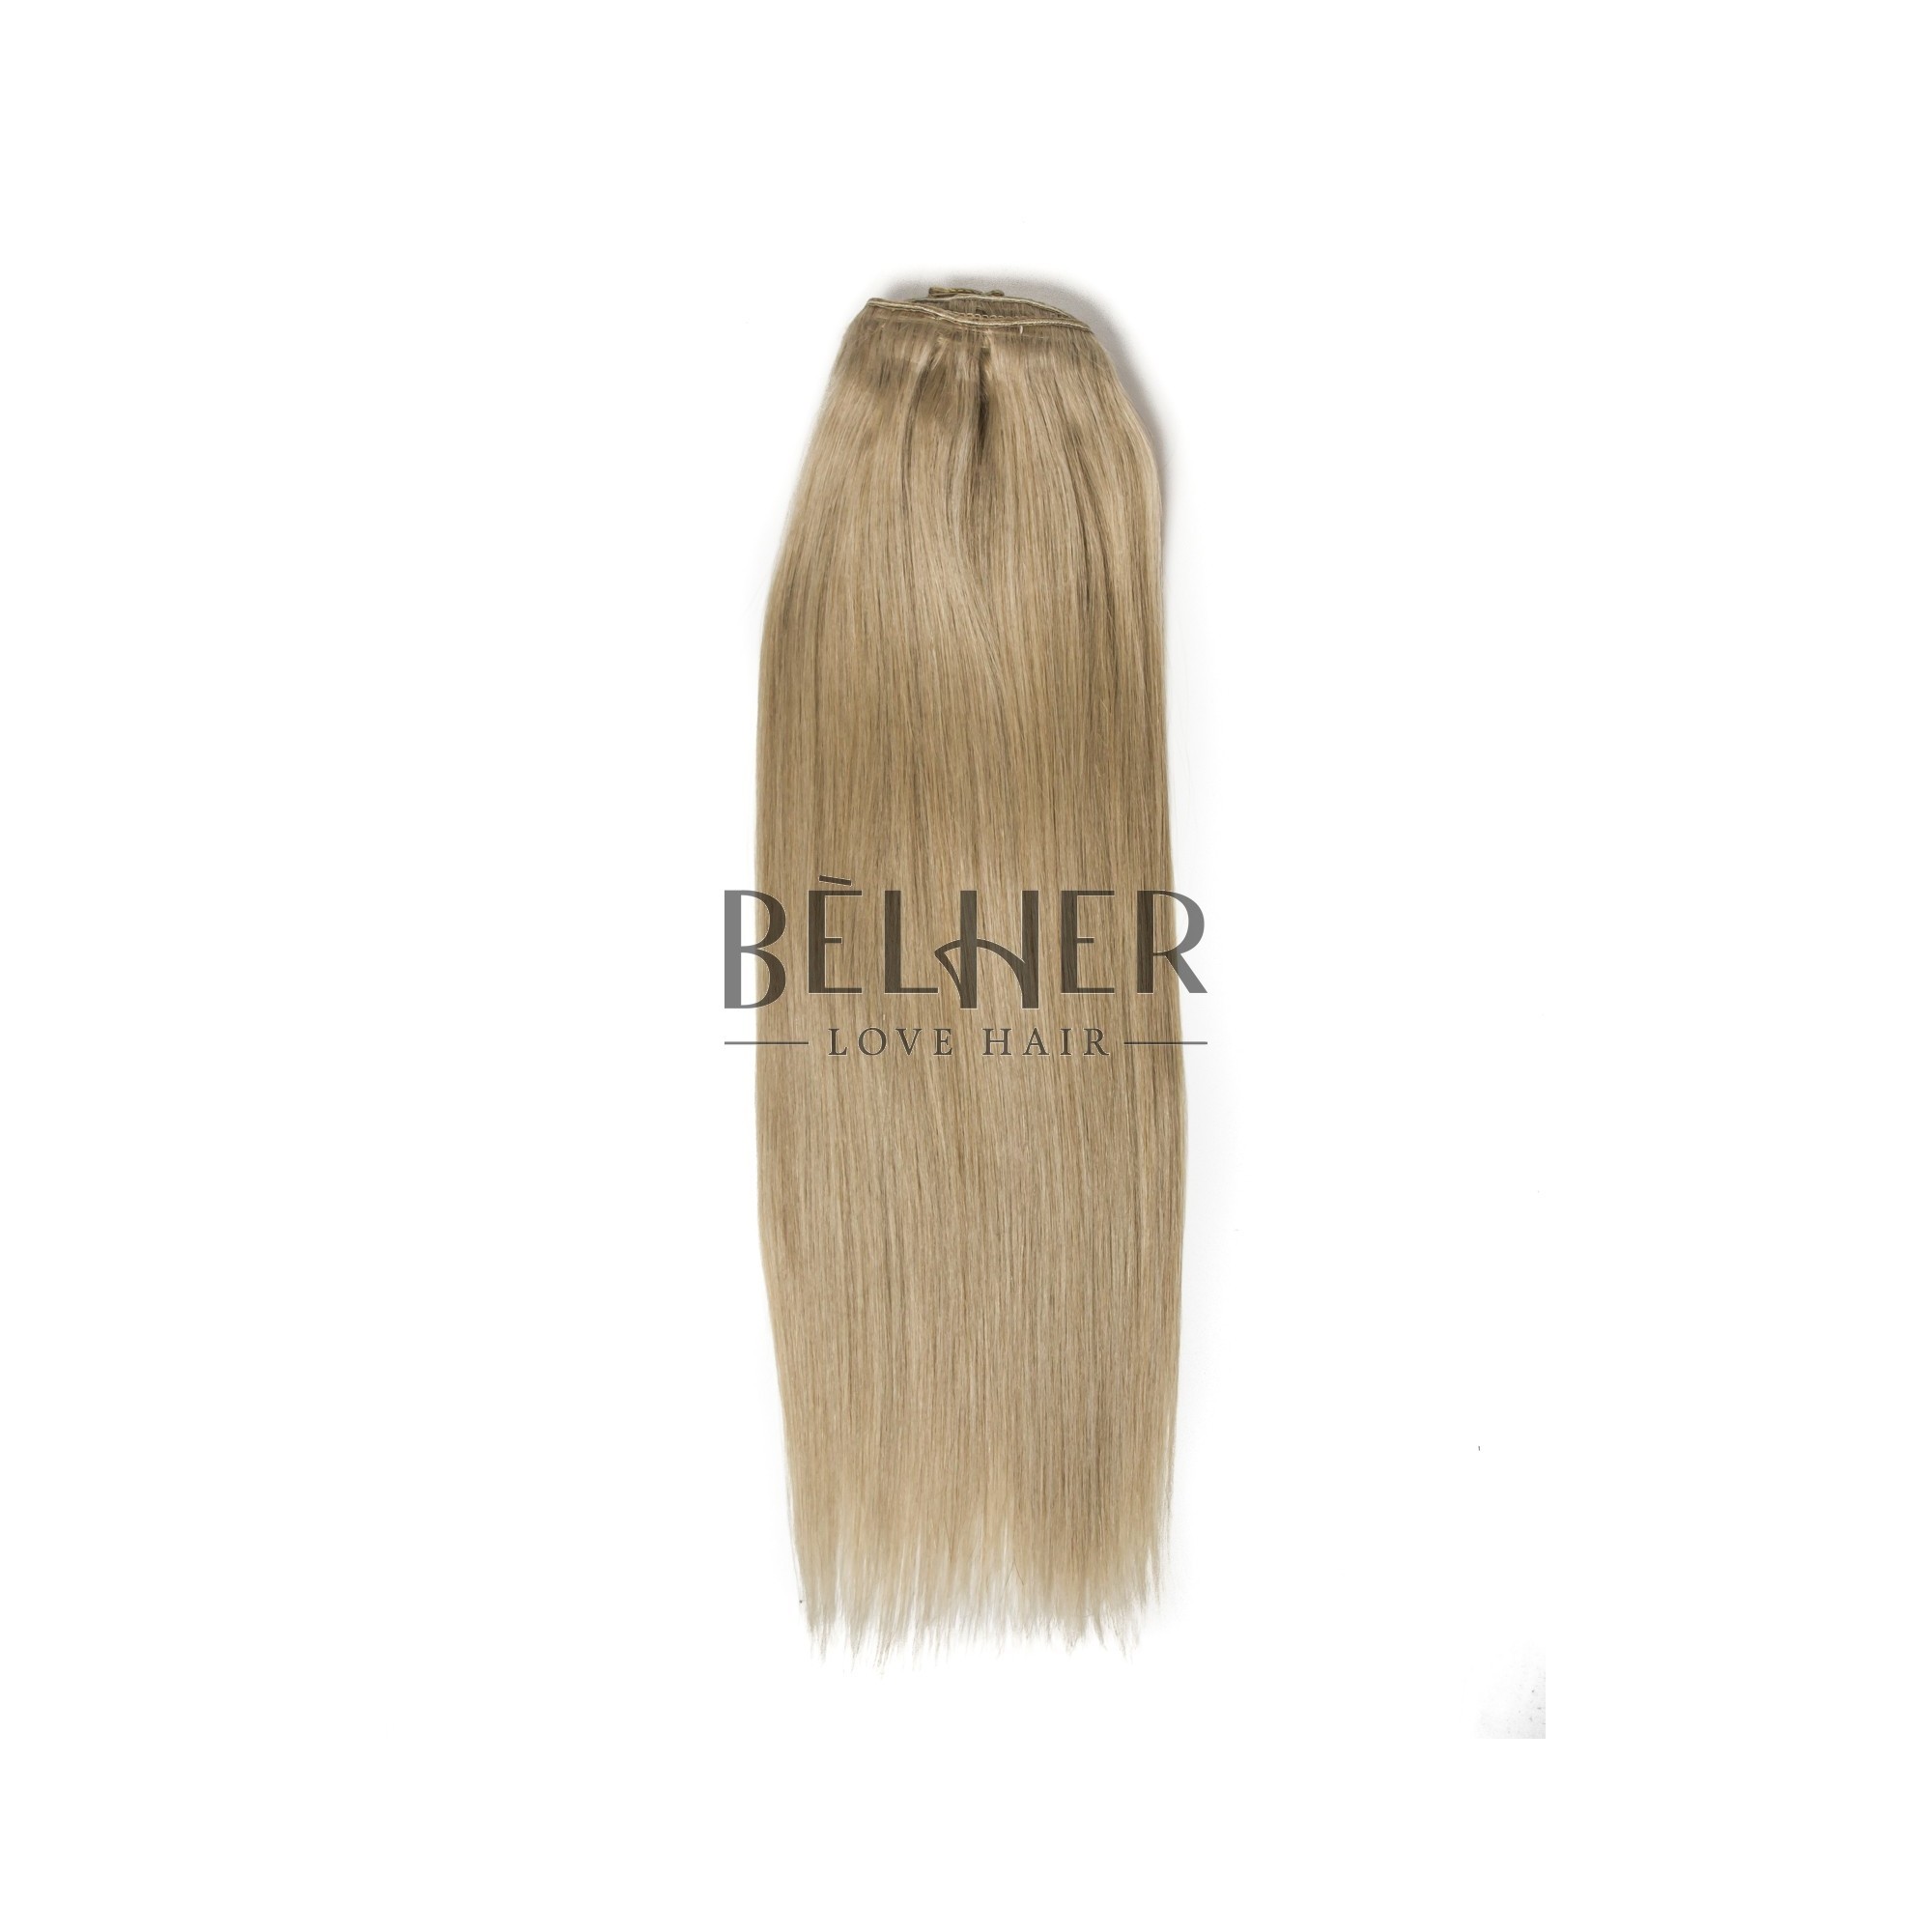 Extensii Clip-On Deluxe Blond Gri